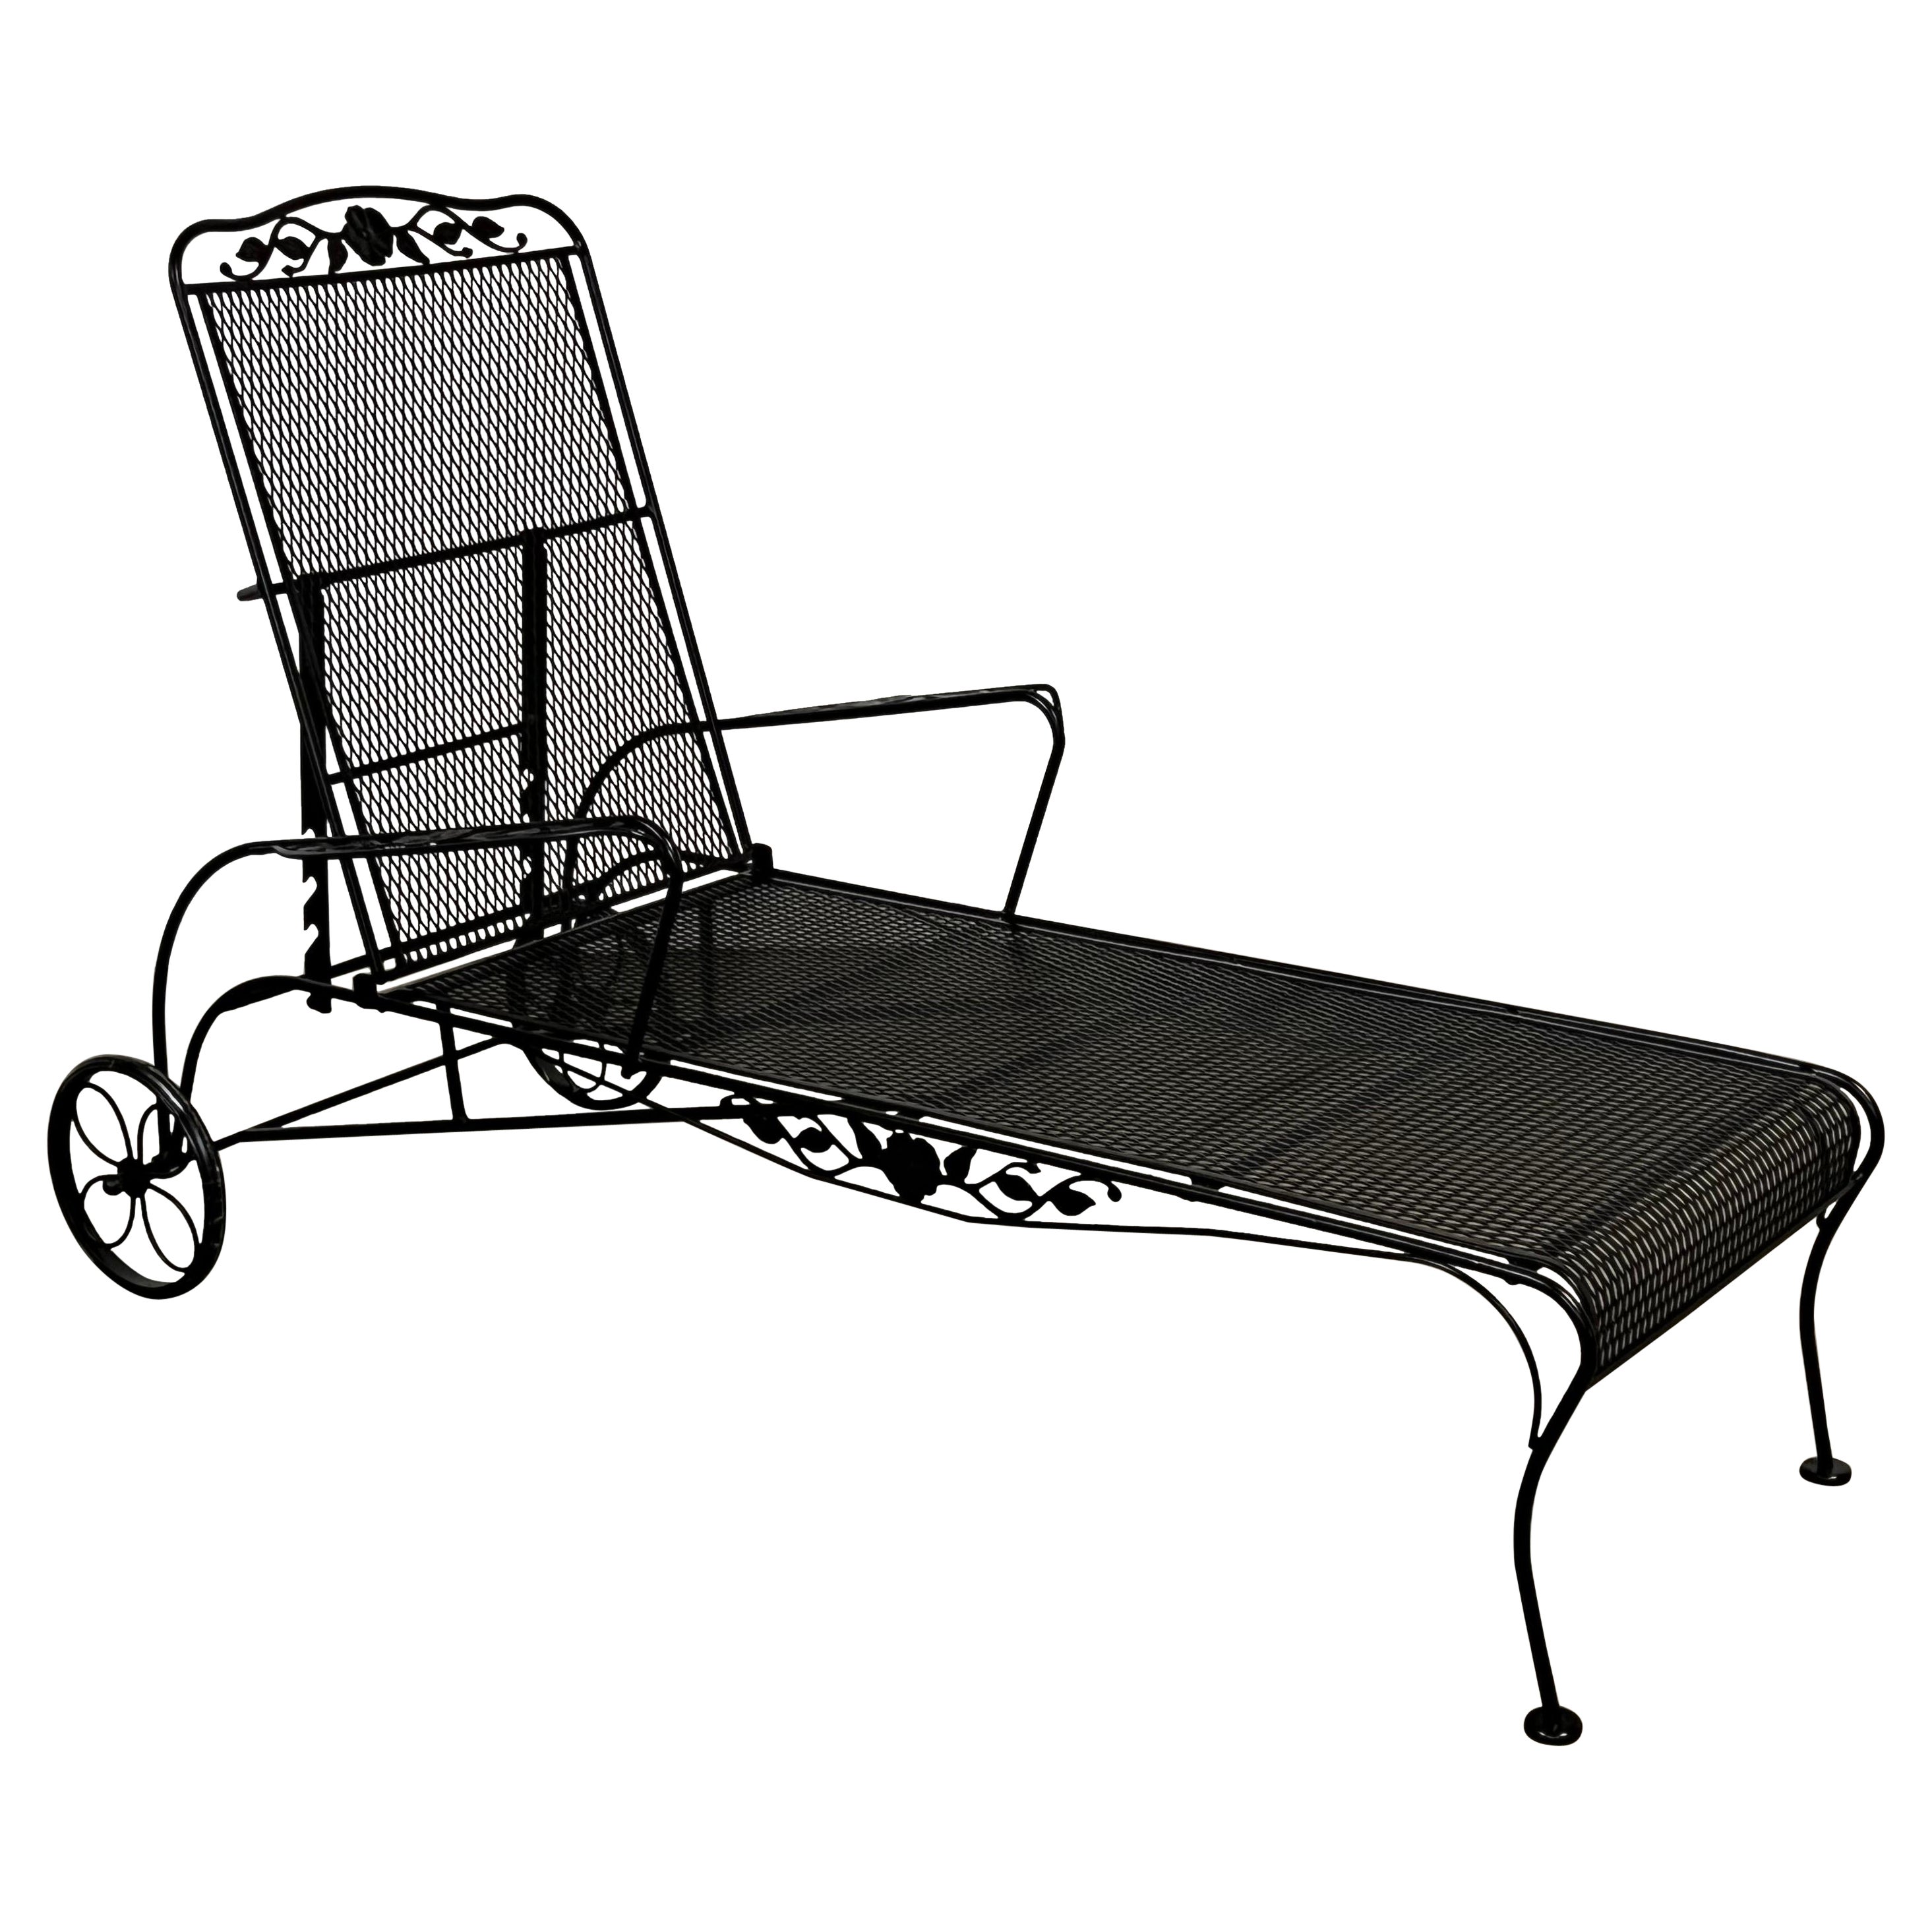  Woodard Style Outdoor Iron Chaise Lounge Chair B